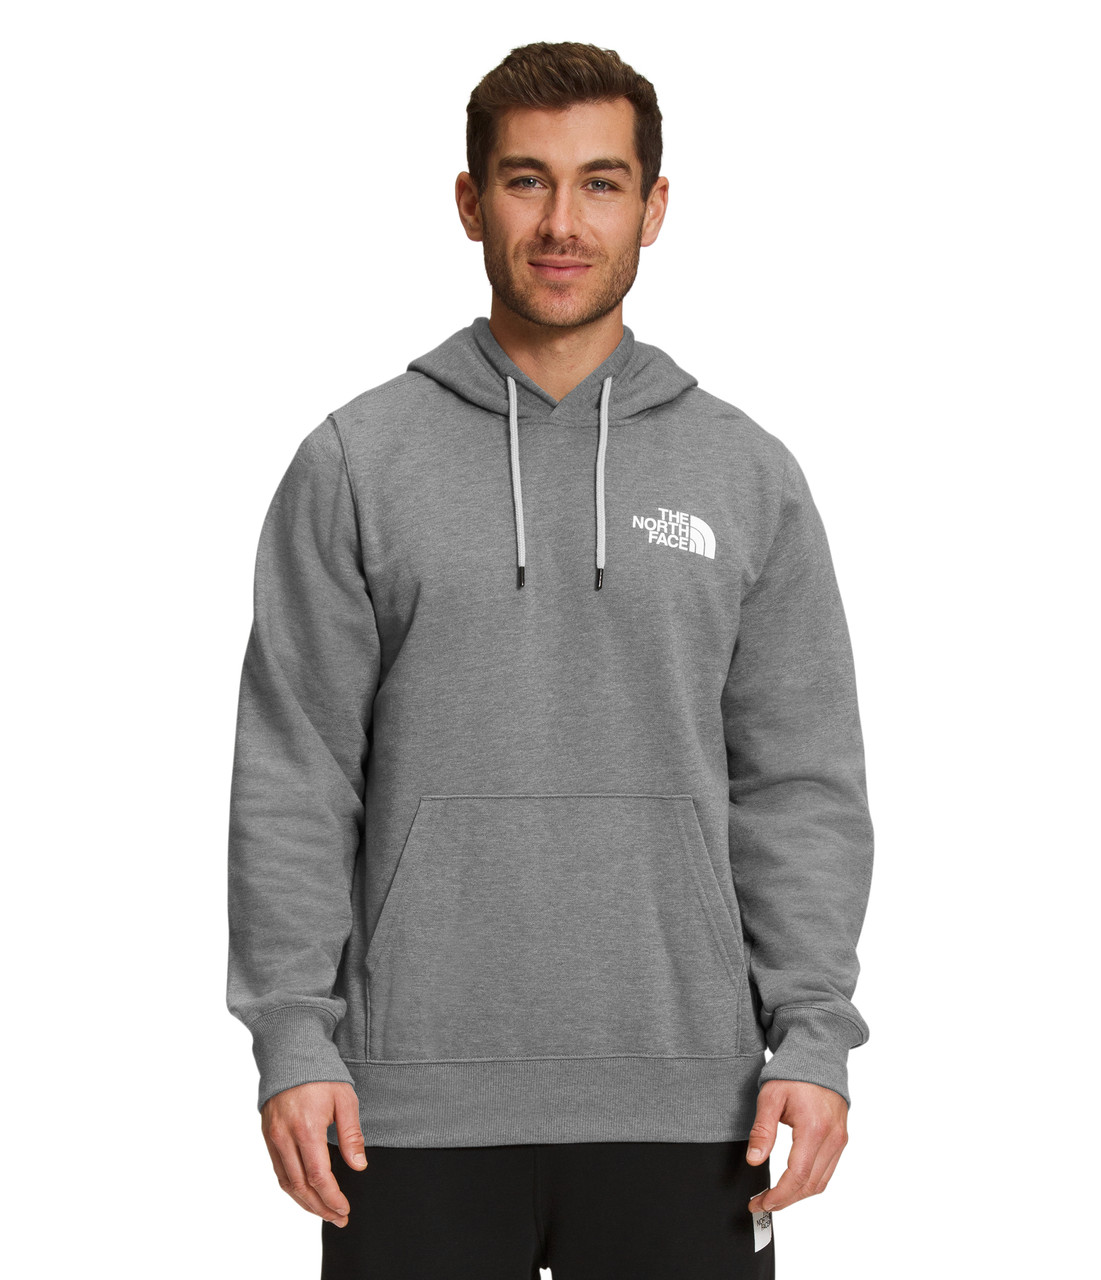 The North Face NSE Box Logo Hoodie in Black